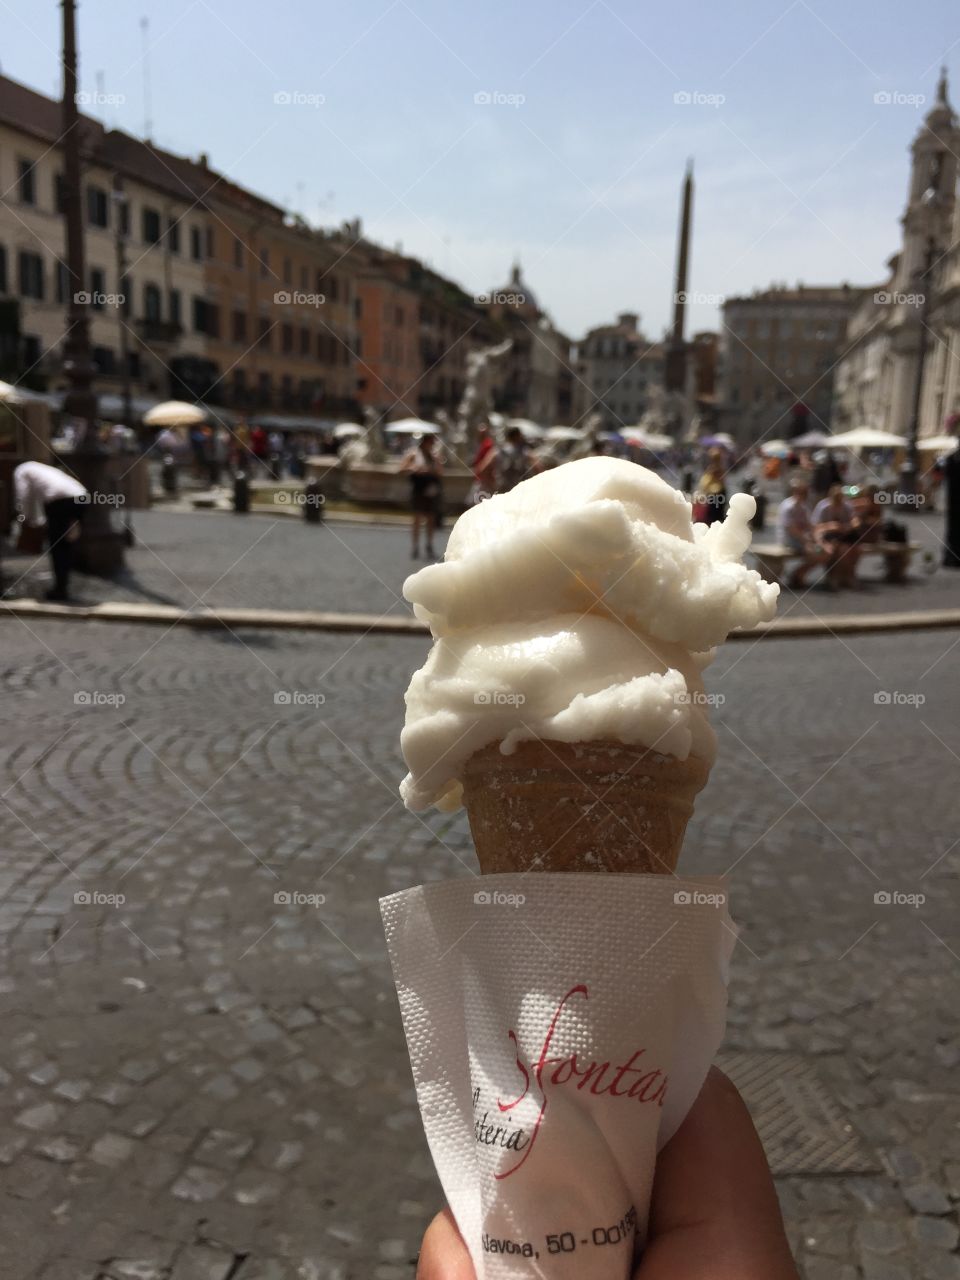 cold and sweet. It was a hot day in Rome and I wanted something cold and sweet